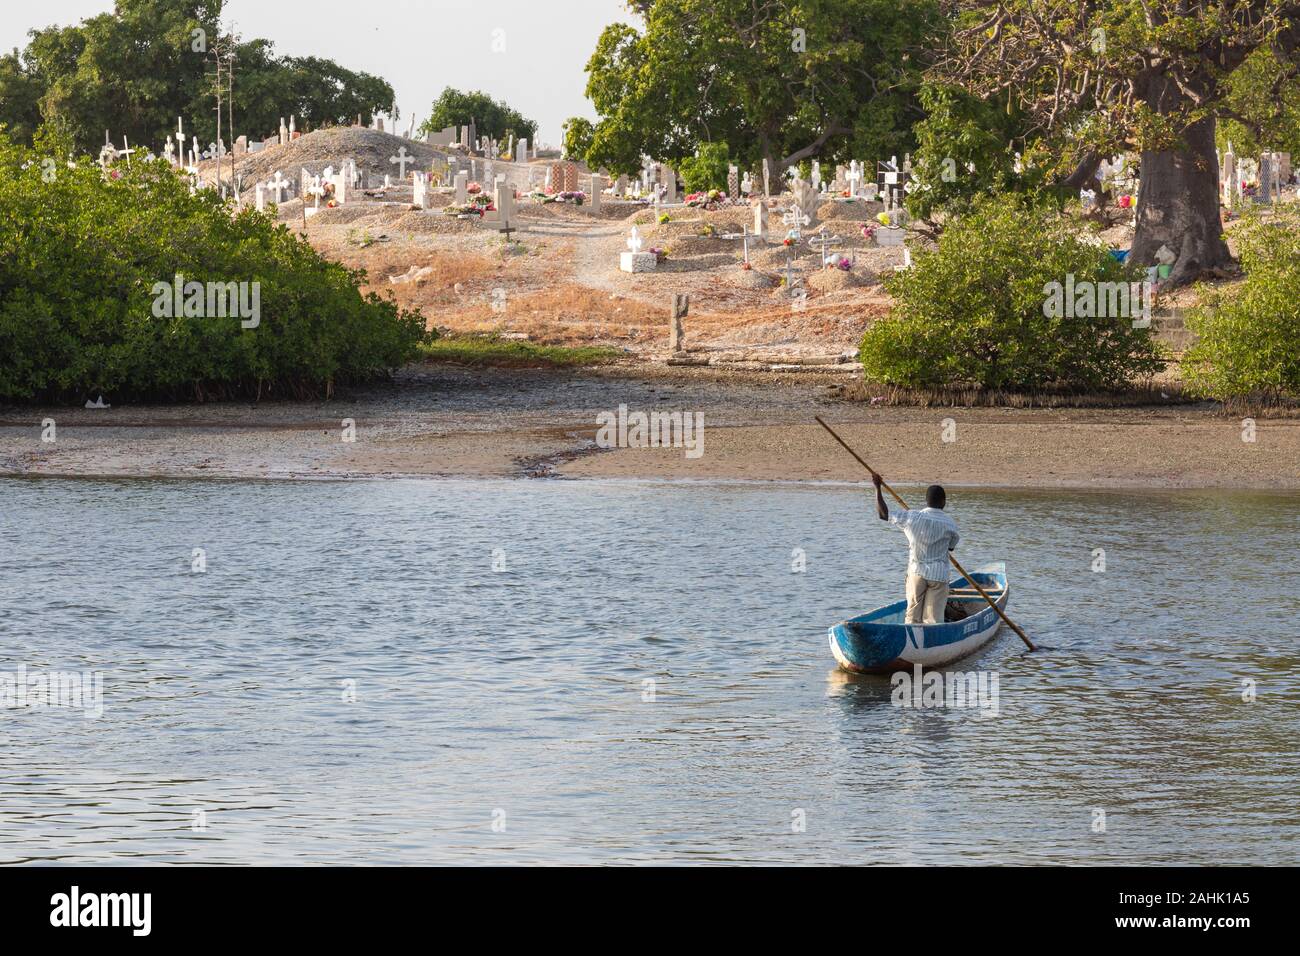 JOAL-FADIOUTH, SENEGAL - NOVEMBER15, 2019: Cemetery at Joal-Fadiouth. Christian graves and crosses next to large baobabs. Fadiauth Island. Senegal. We Stock Photo